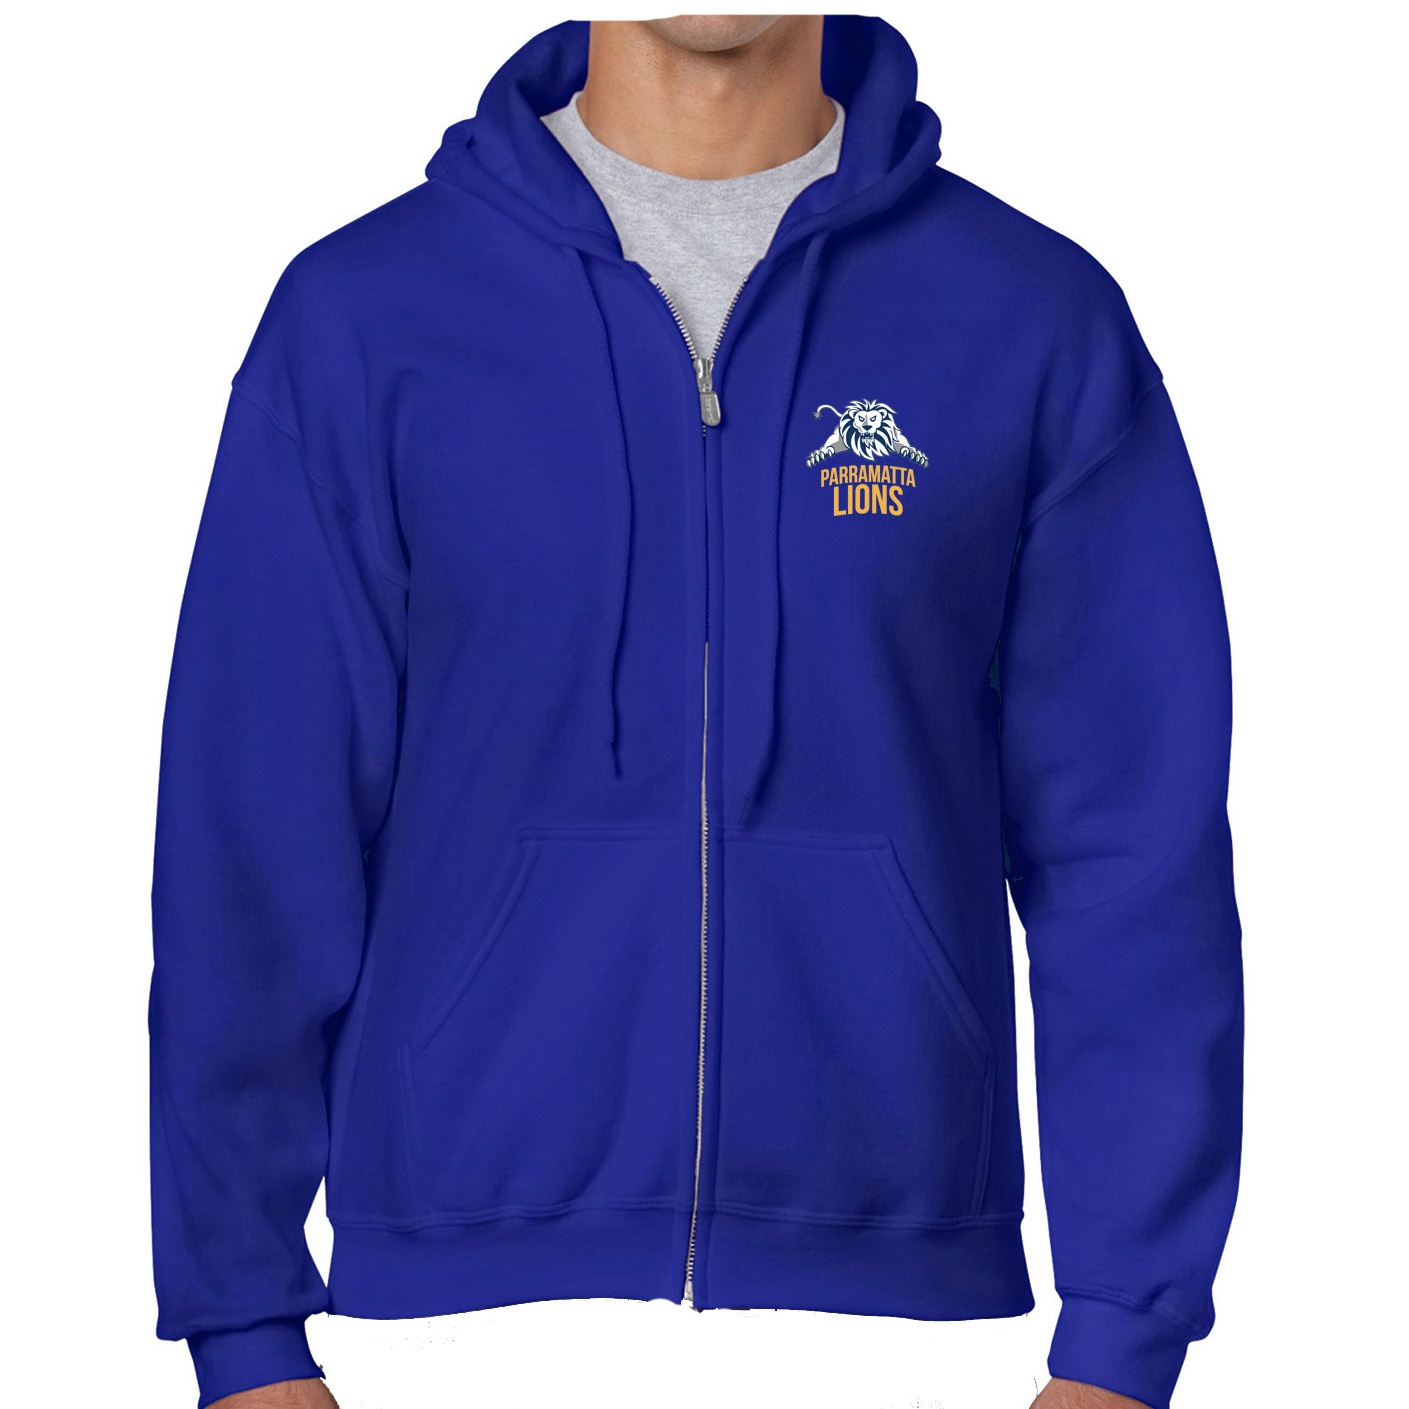 Full Zip Hoodie – Lions – Parramatta Lions and Lionesses